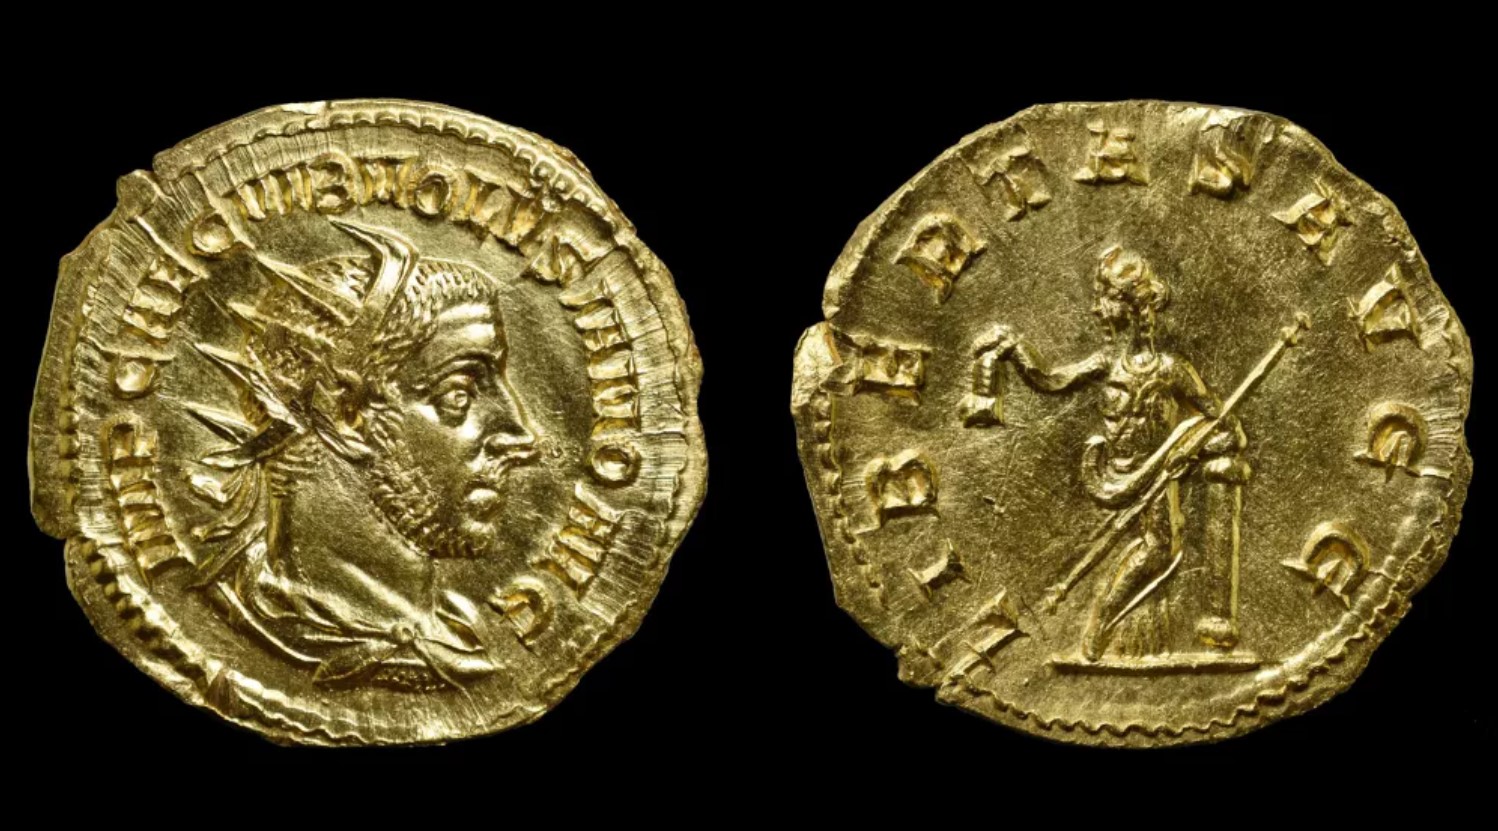 Cooperating detectorist finds extremely rare Roman gold coin from the 3rd century